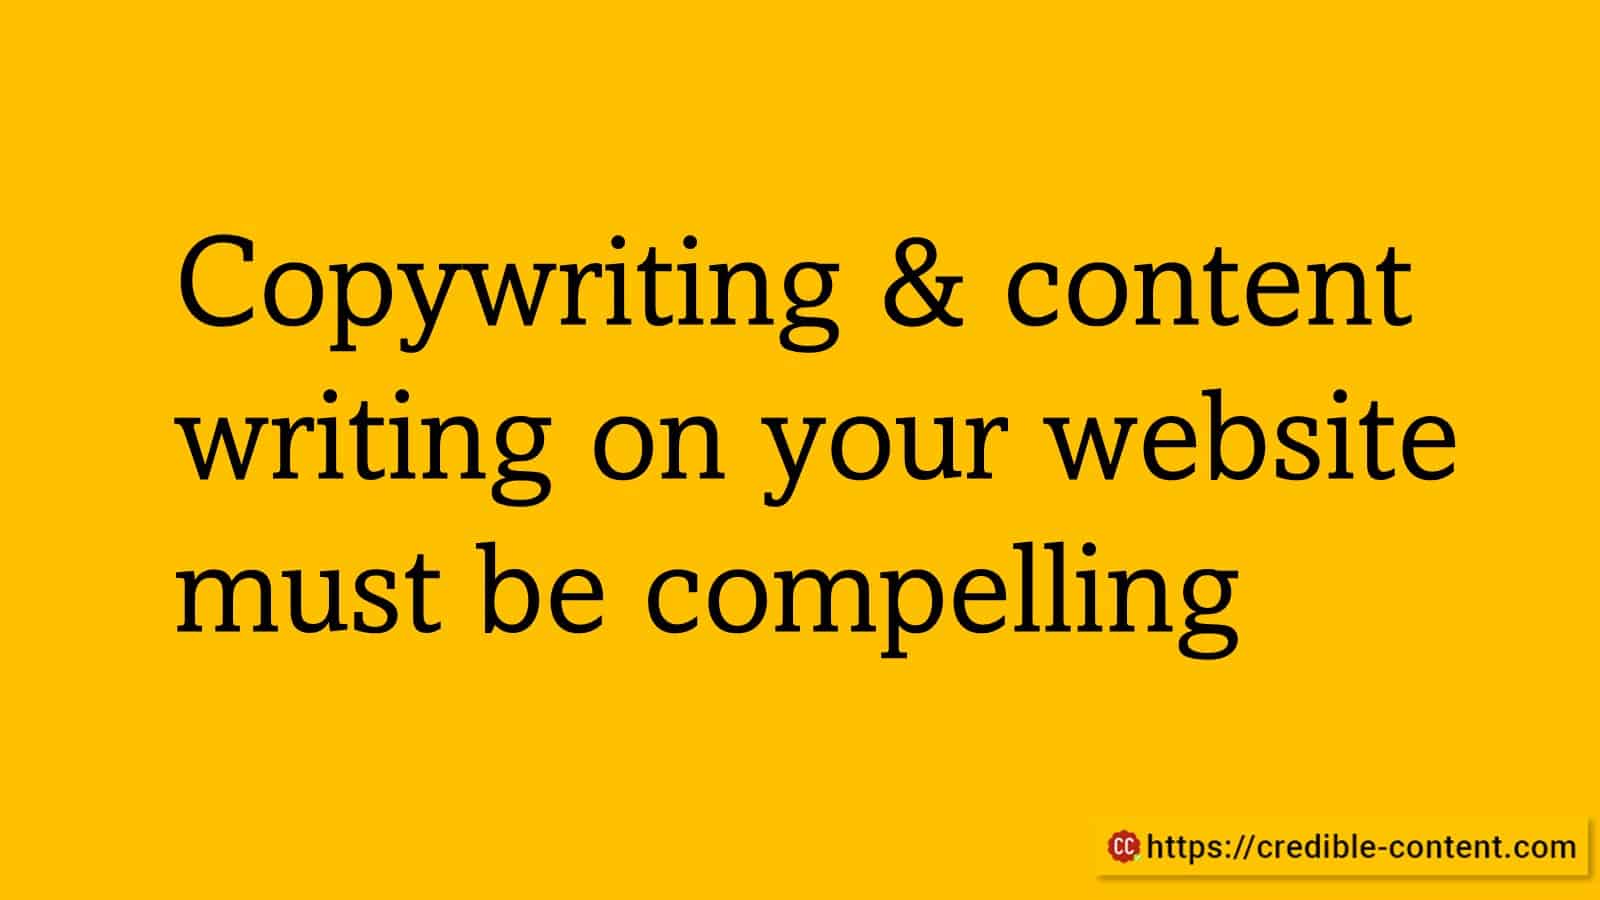 Content writing and copywriting on your fintech website must be compelling